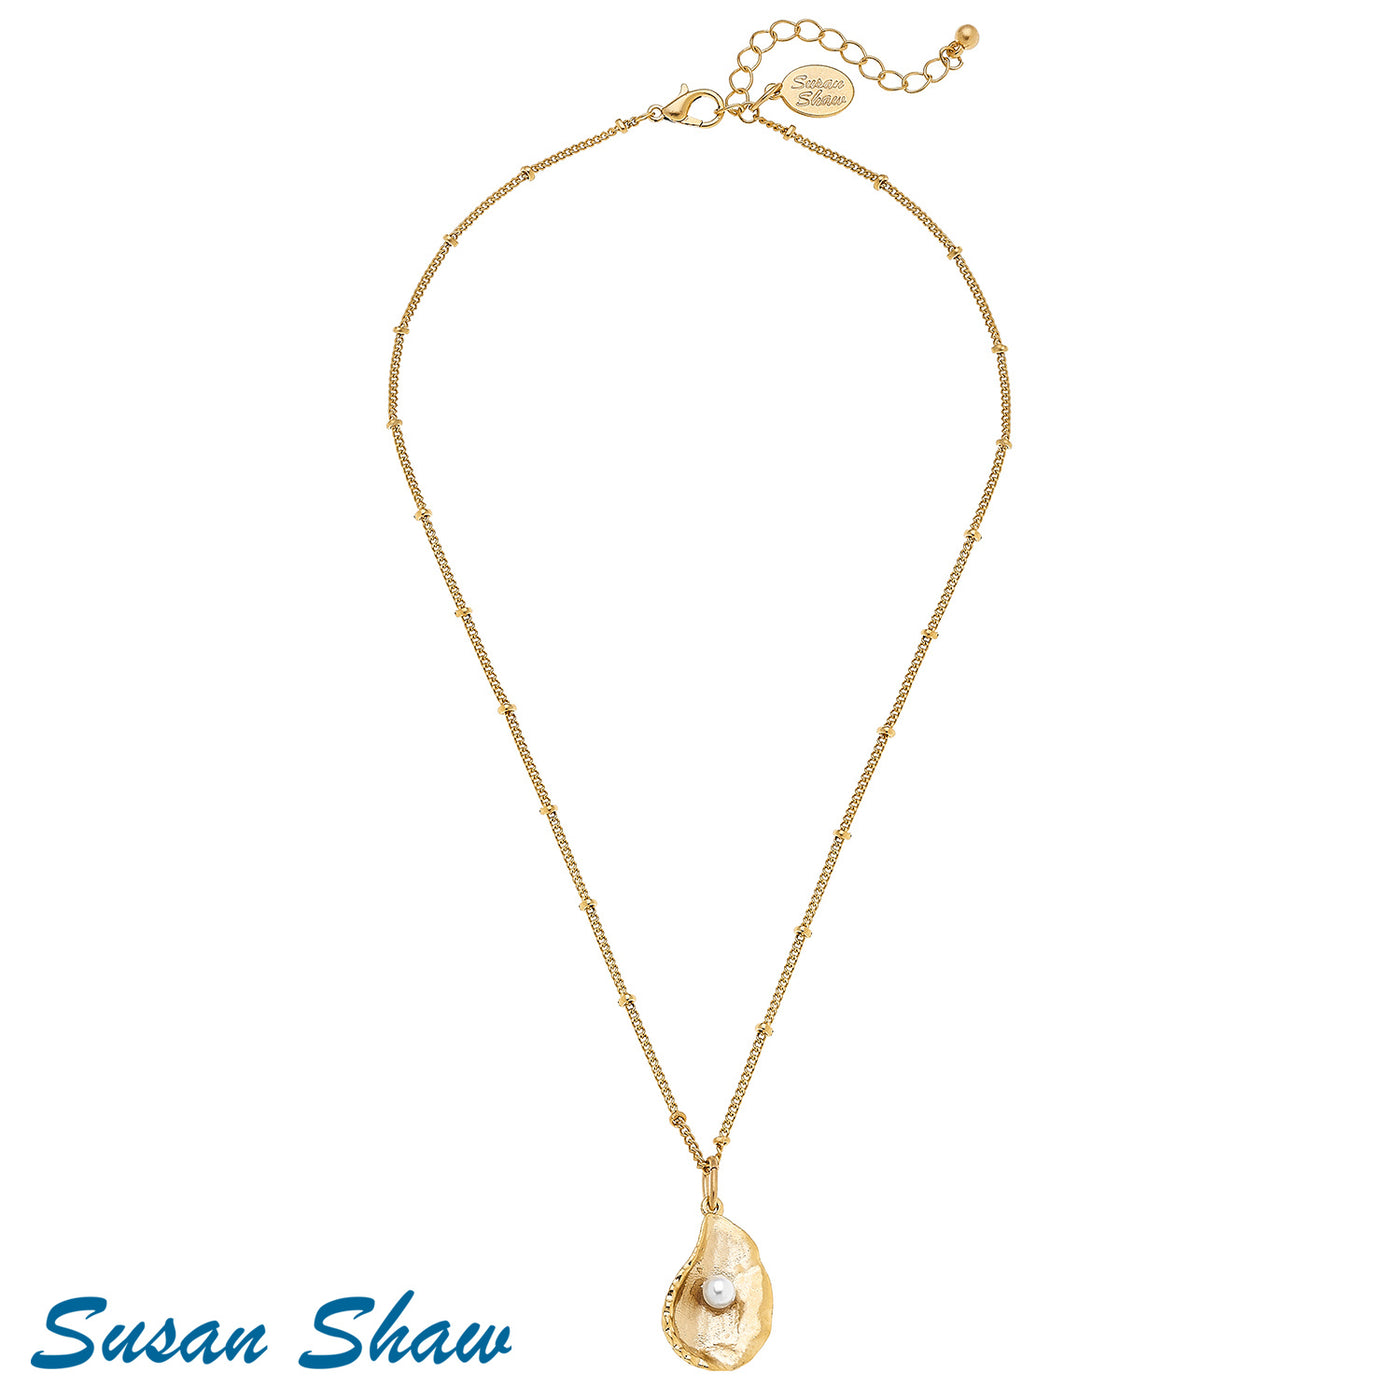 Susan Shaw Oyster Pearl Necklace